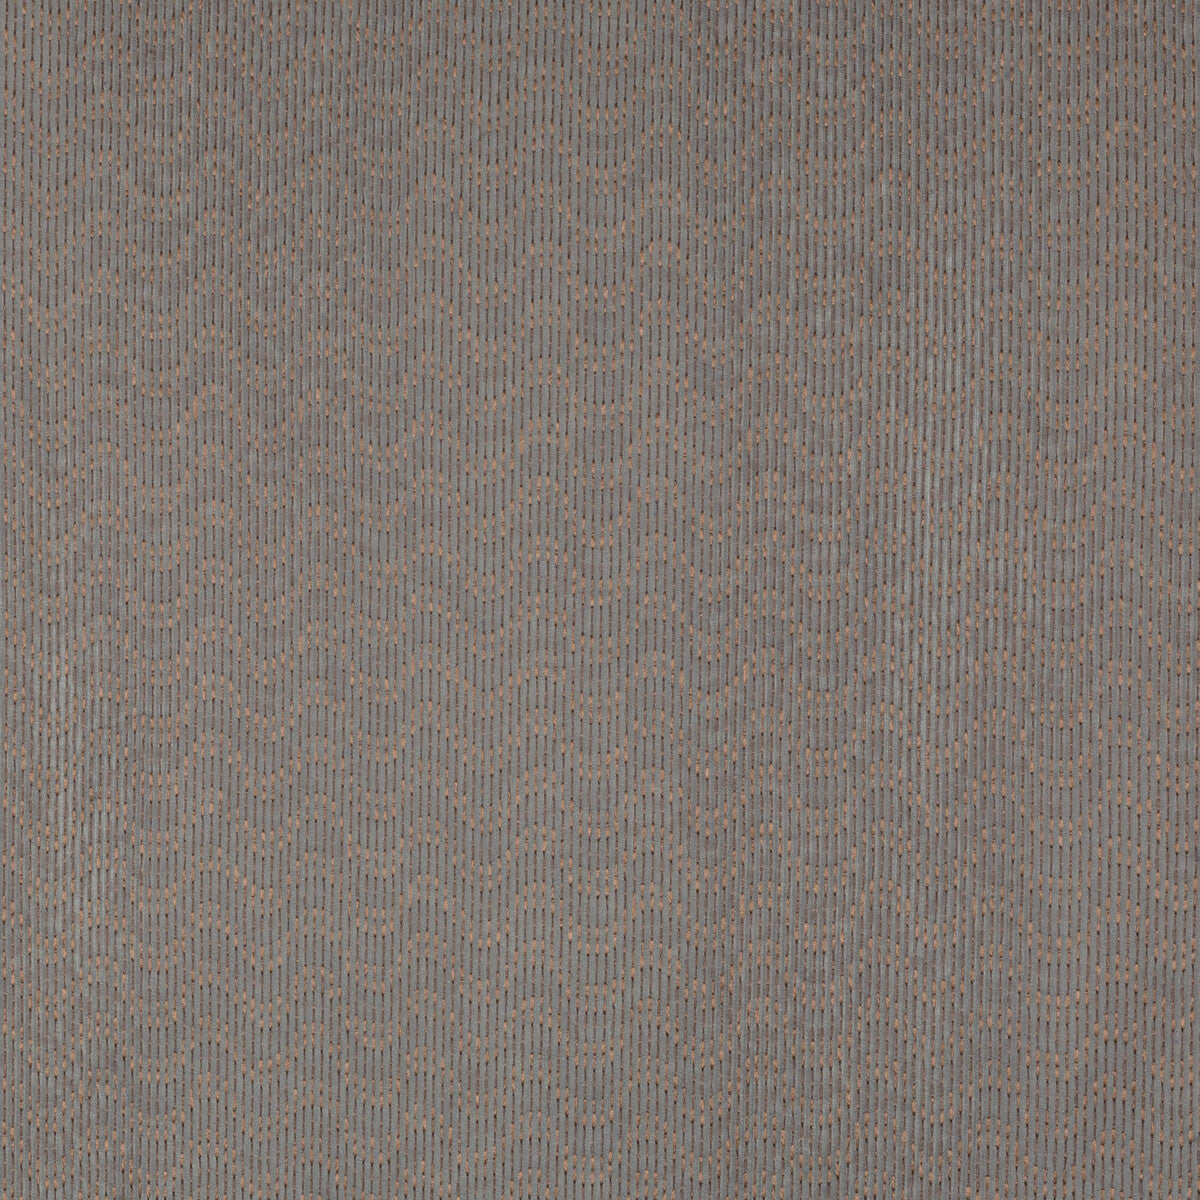 Helius fabric in burnished color - pattern 4816.21.0 - by Kravet Contract